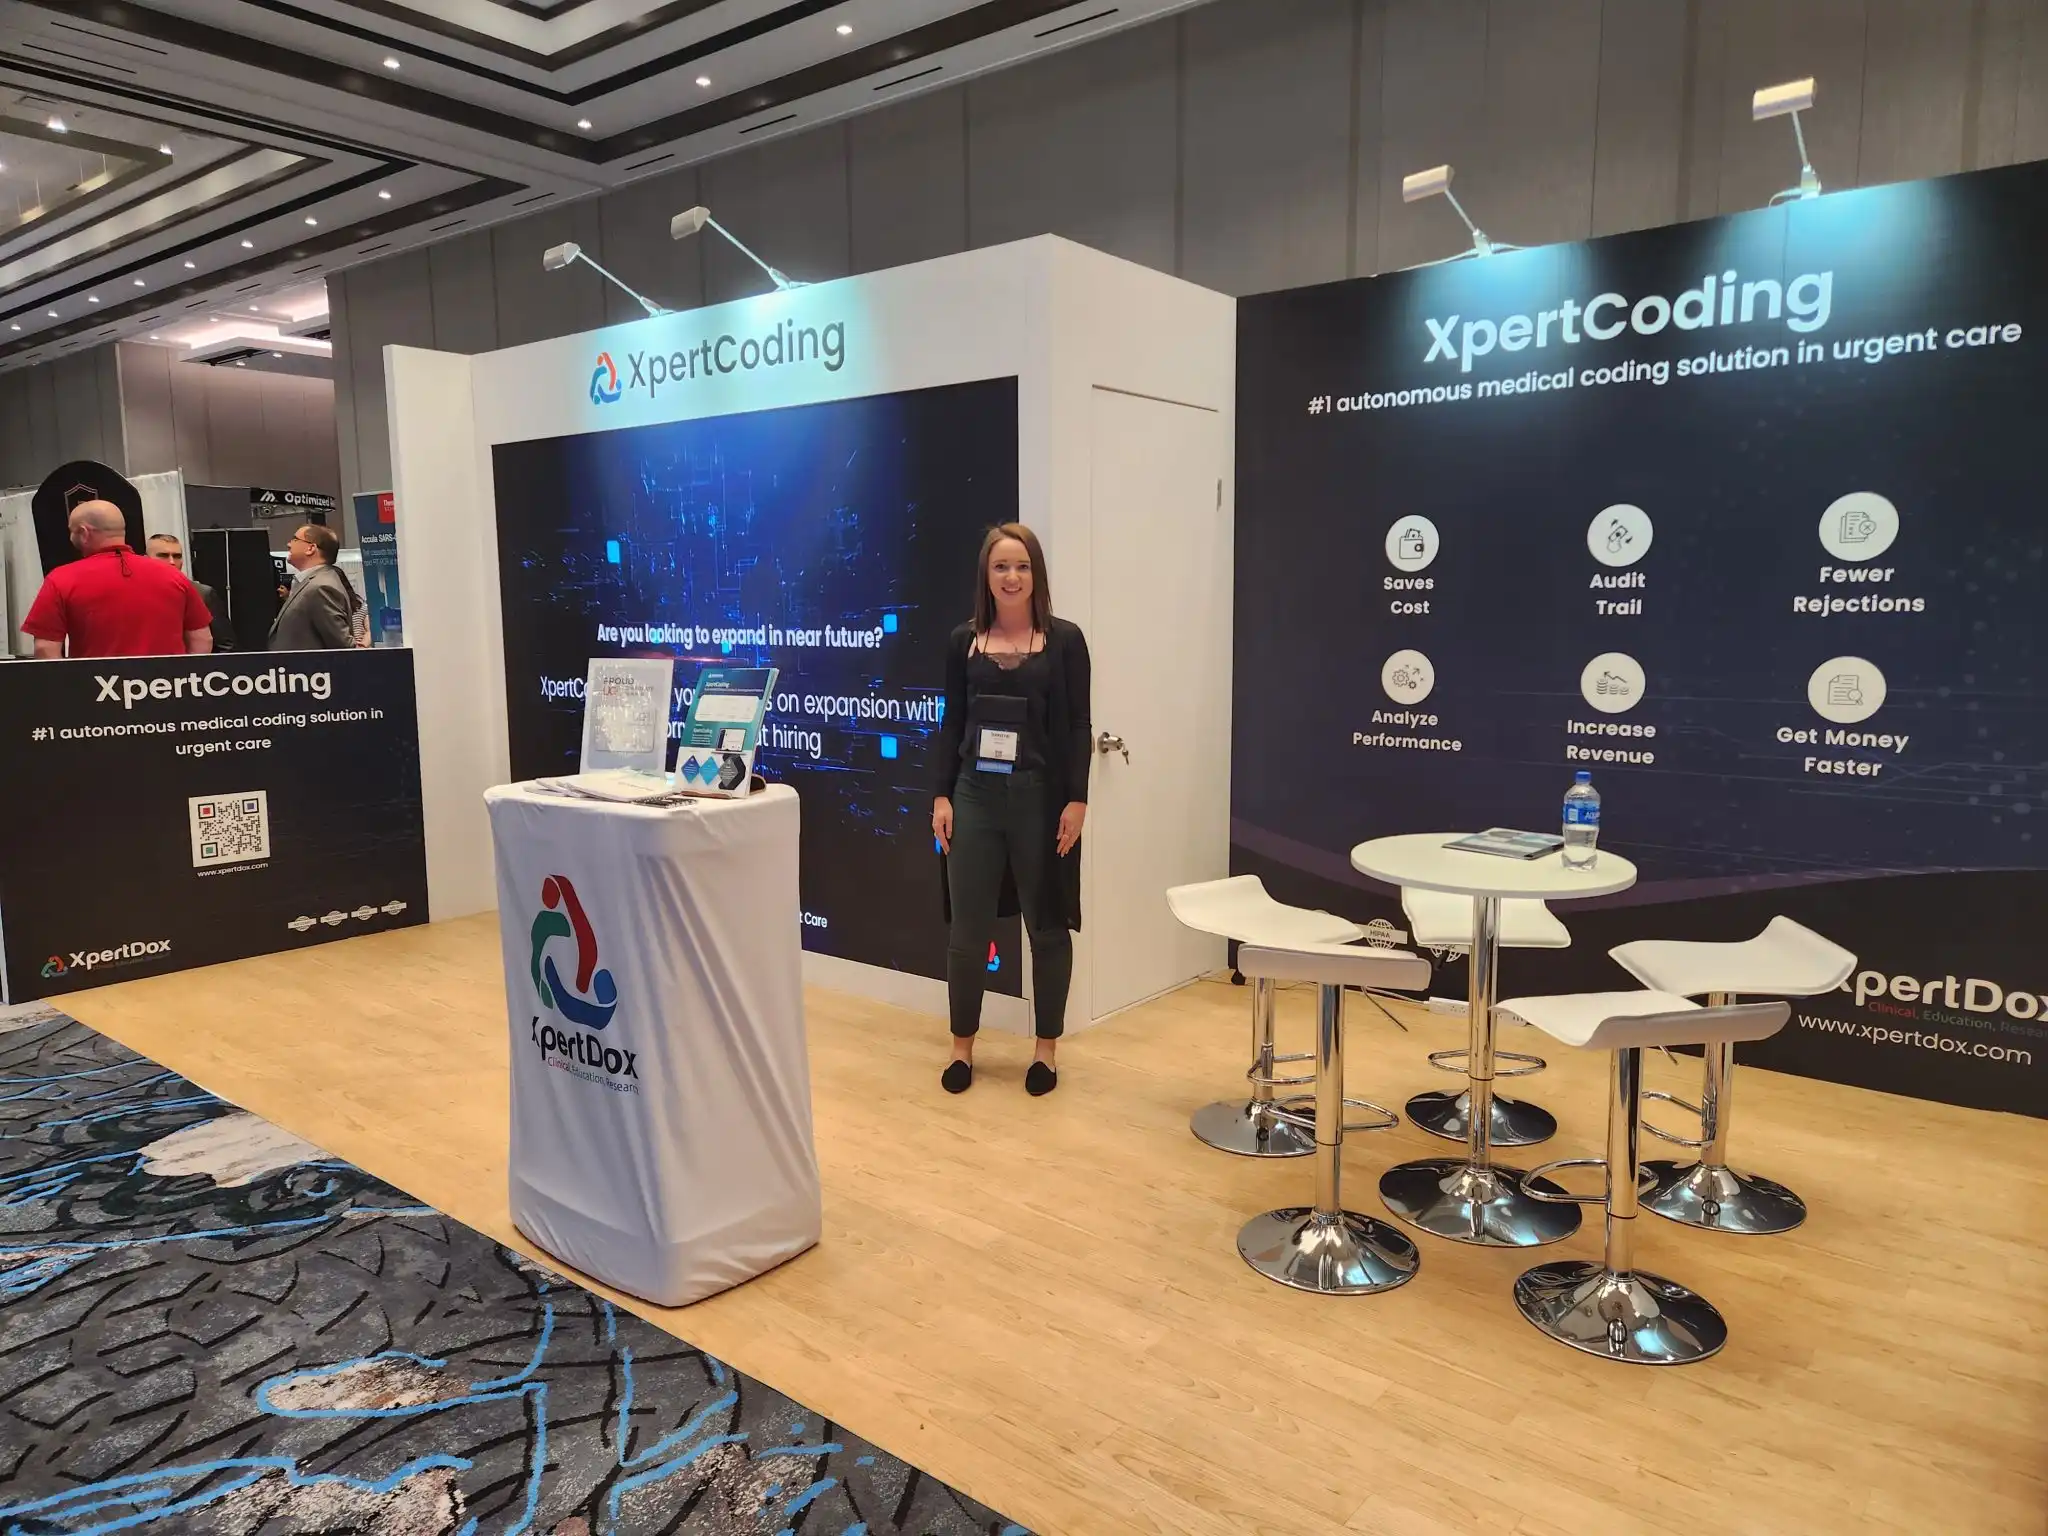 XpertDox booth at UCC 2023 showcasing XpertCoding, the AI medical coding solution, with a representative and attendees in a conference hall.